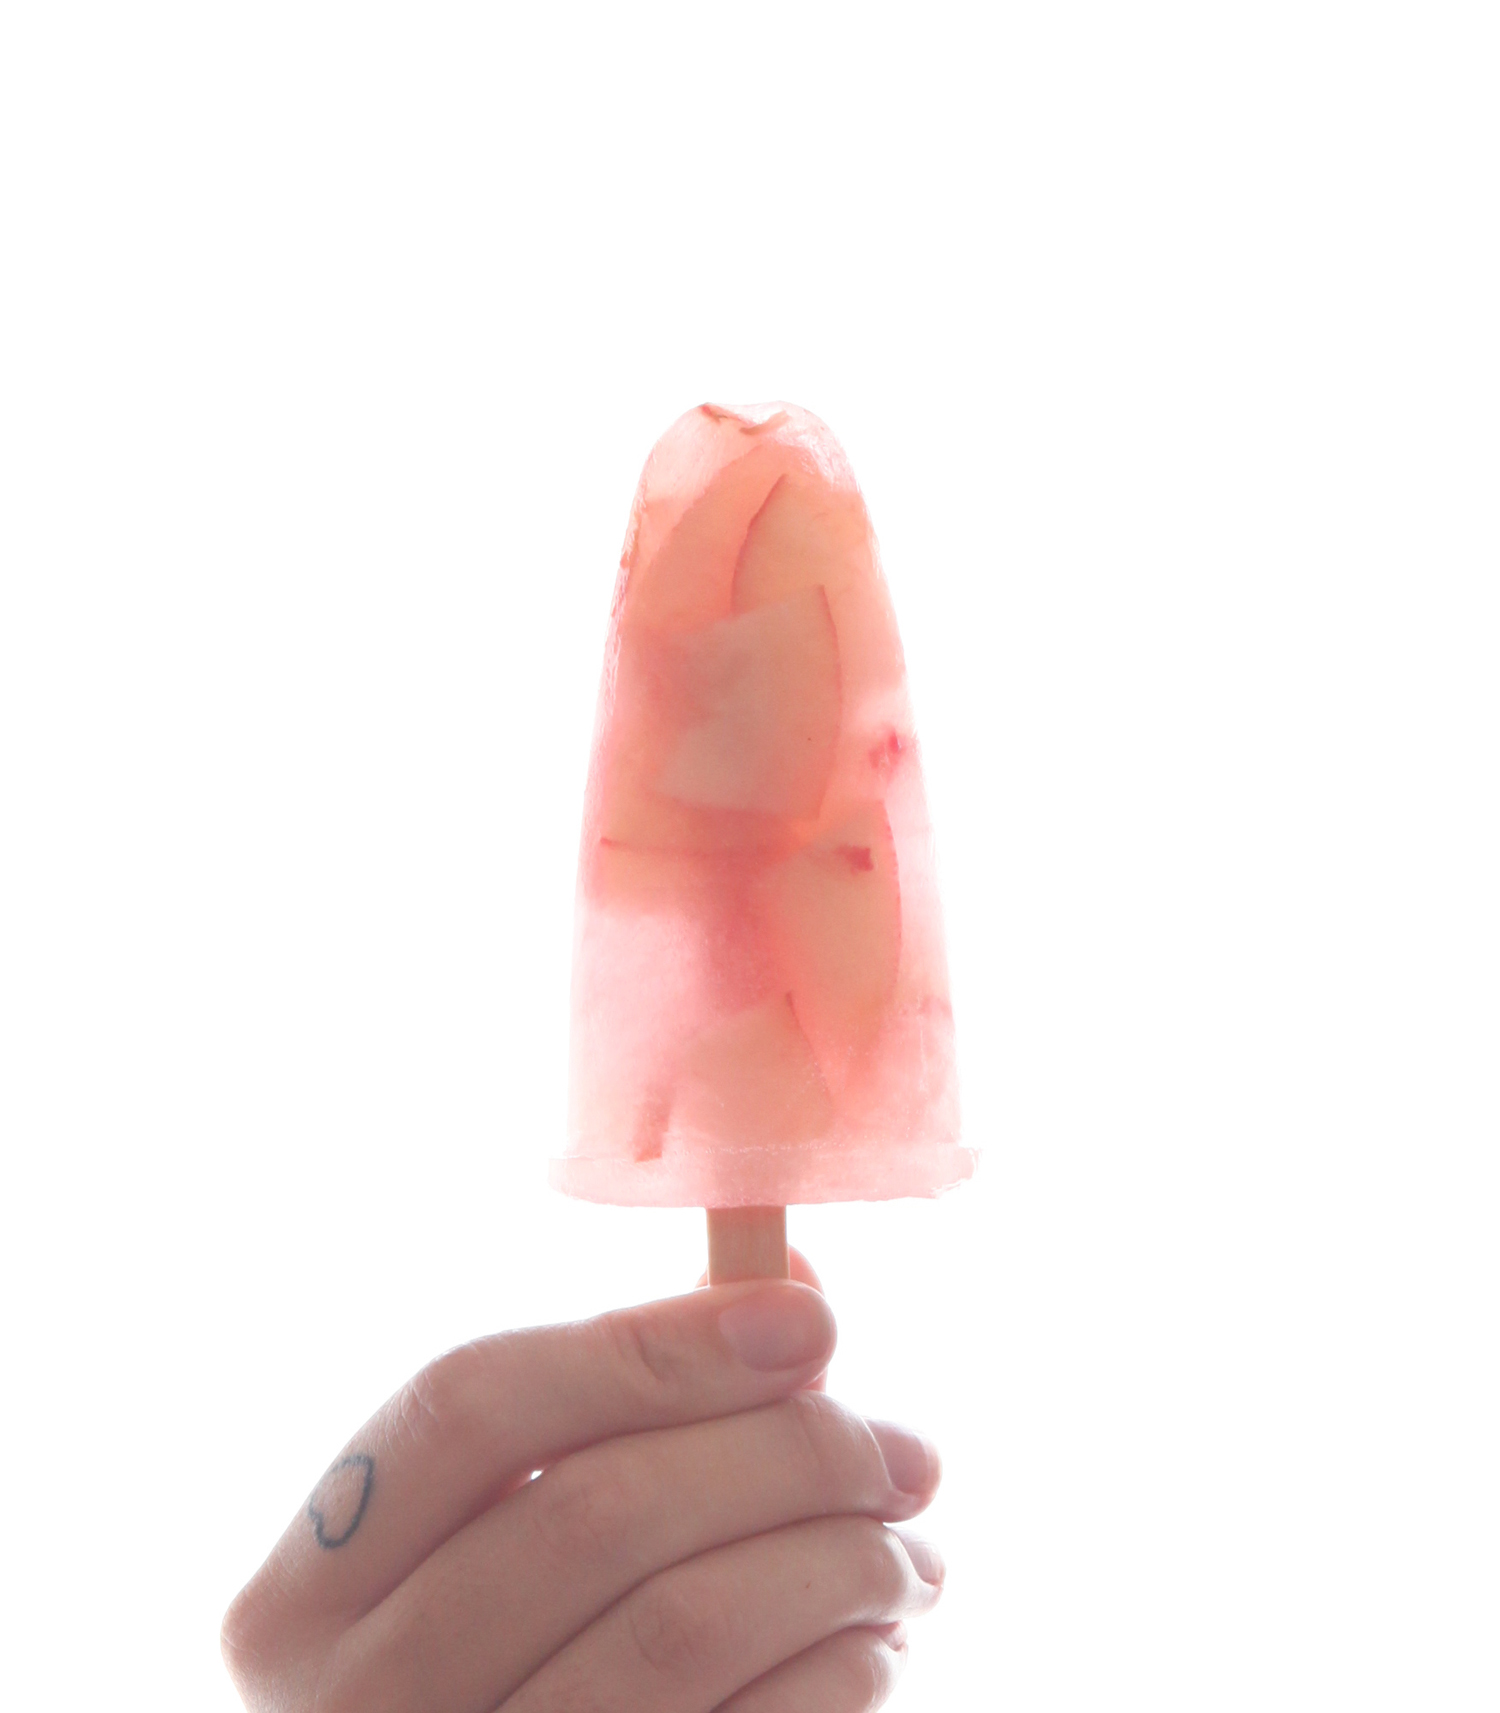 Don't mess with te rabbit - IKEA - les glaces aux fruits anti canicule - framboise nectarine